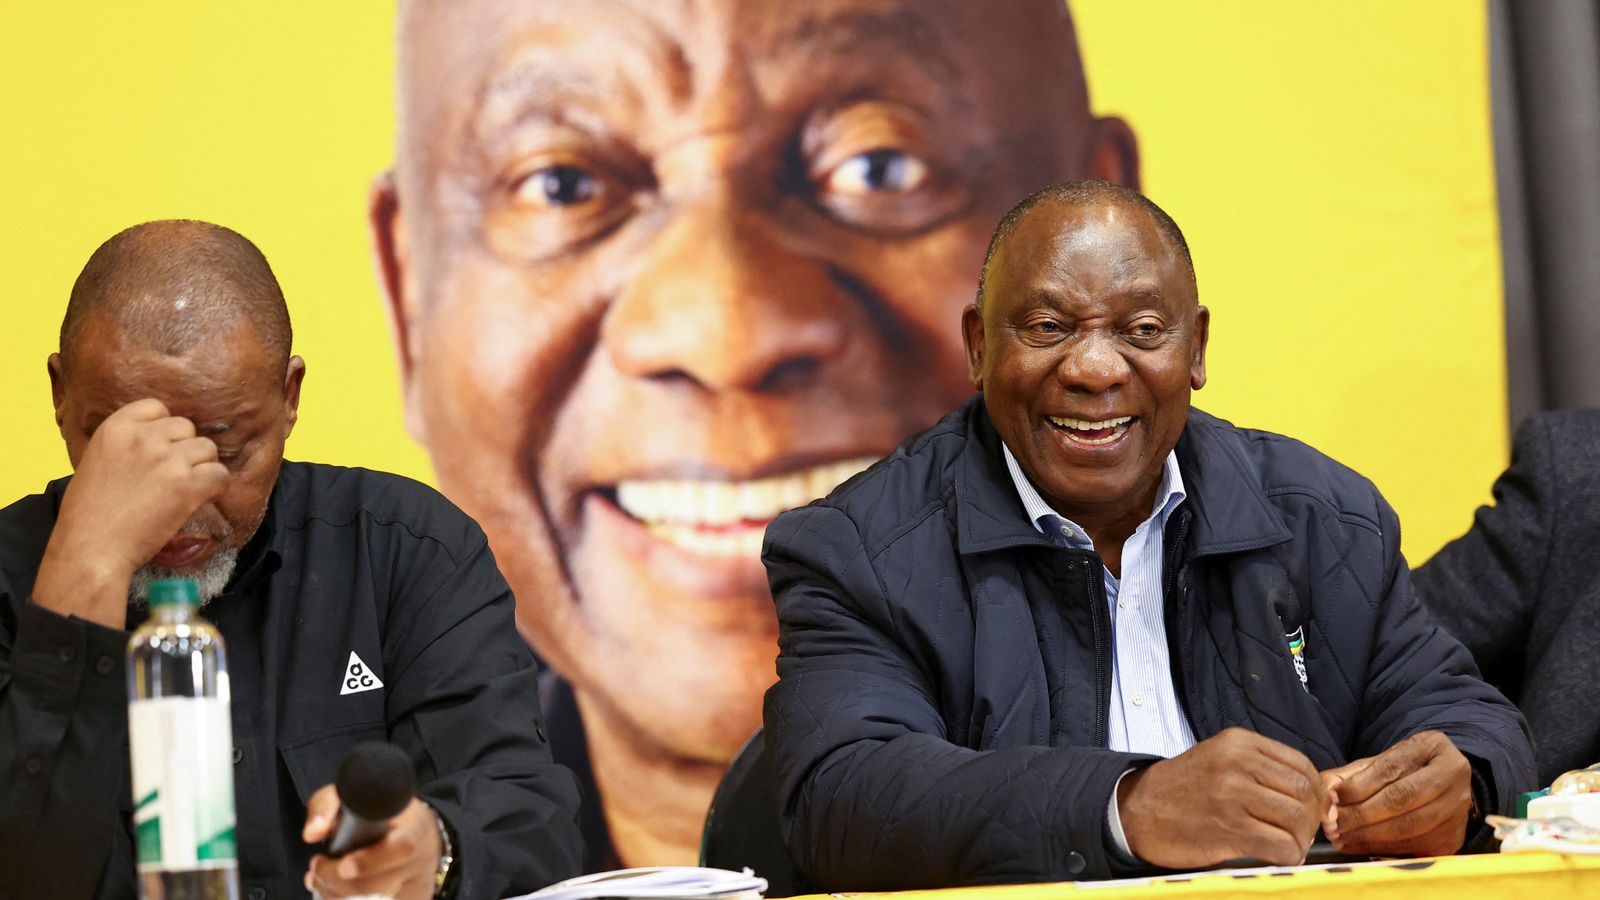 South Africa's ANC reaches deal with opposition to form unity government